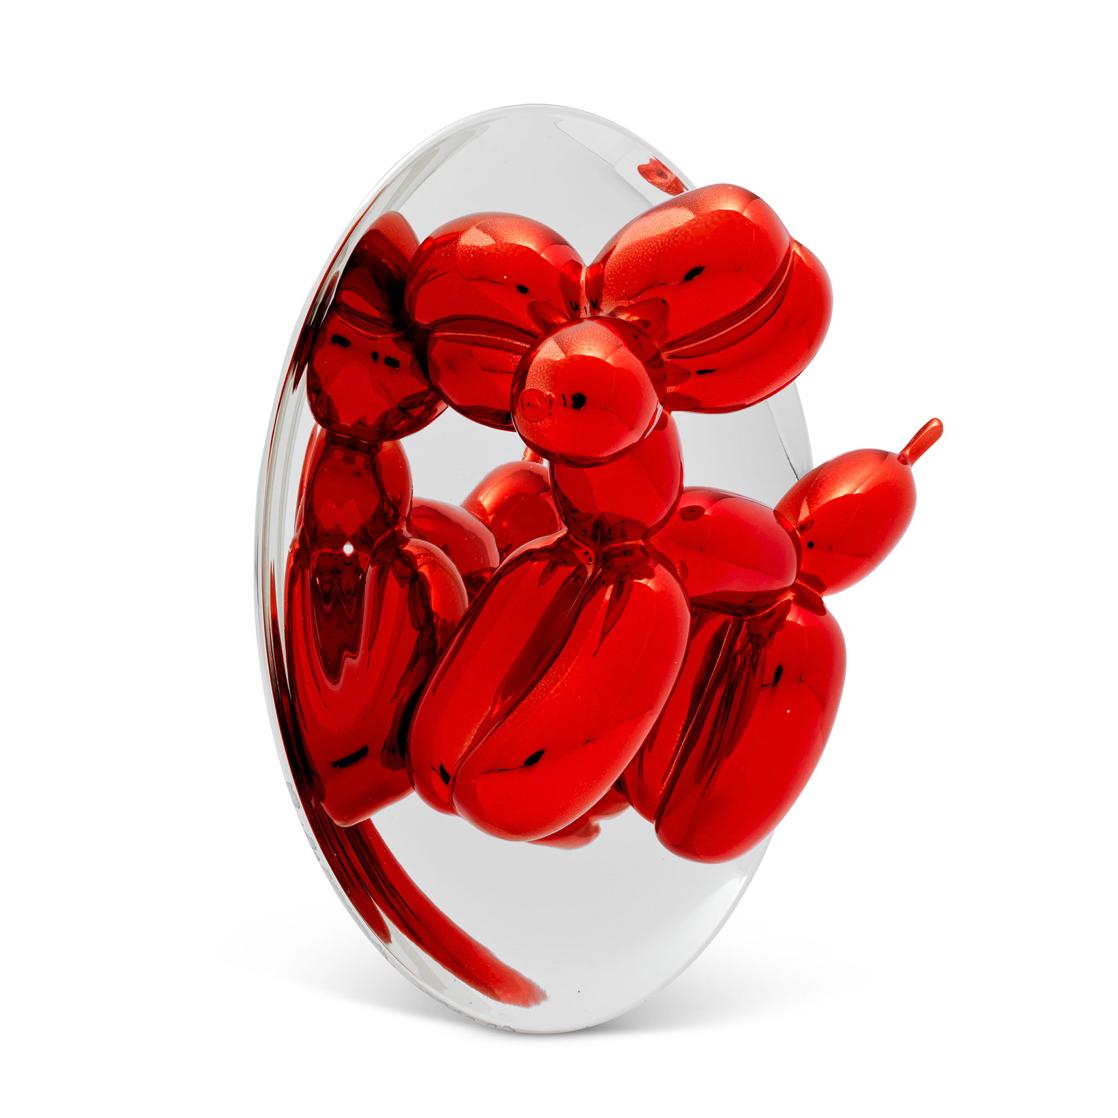 JEFF KOONS (1955-Present)

Metallic porcelain multiple in red and silver, 1995, numbered 653/2300 on a label affixed to underside (there were also fifty artist's proofs), published by the Museum of Contemporary Art, Los Angeles, lacking the original